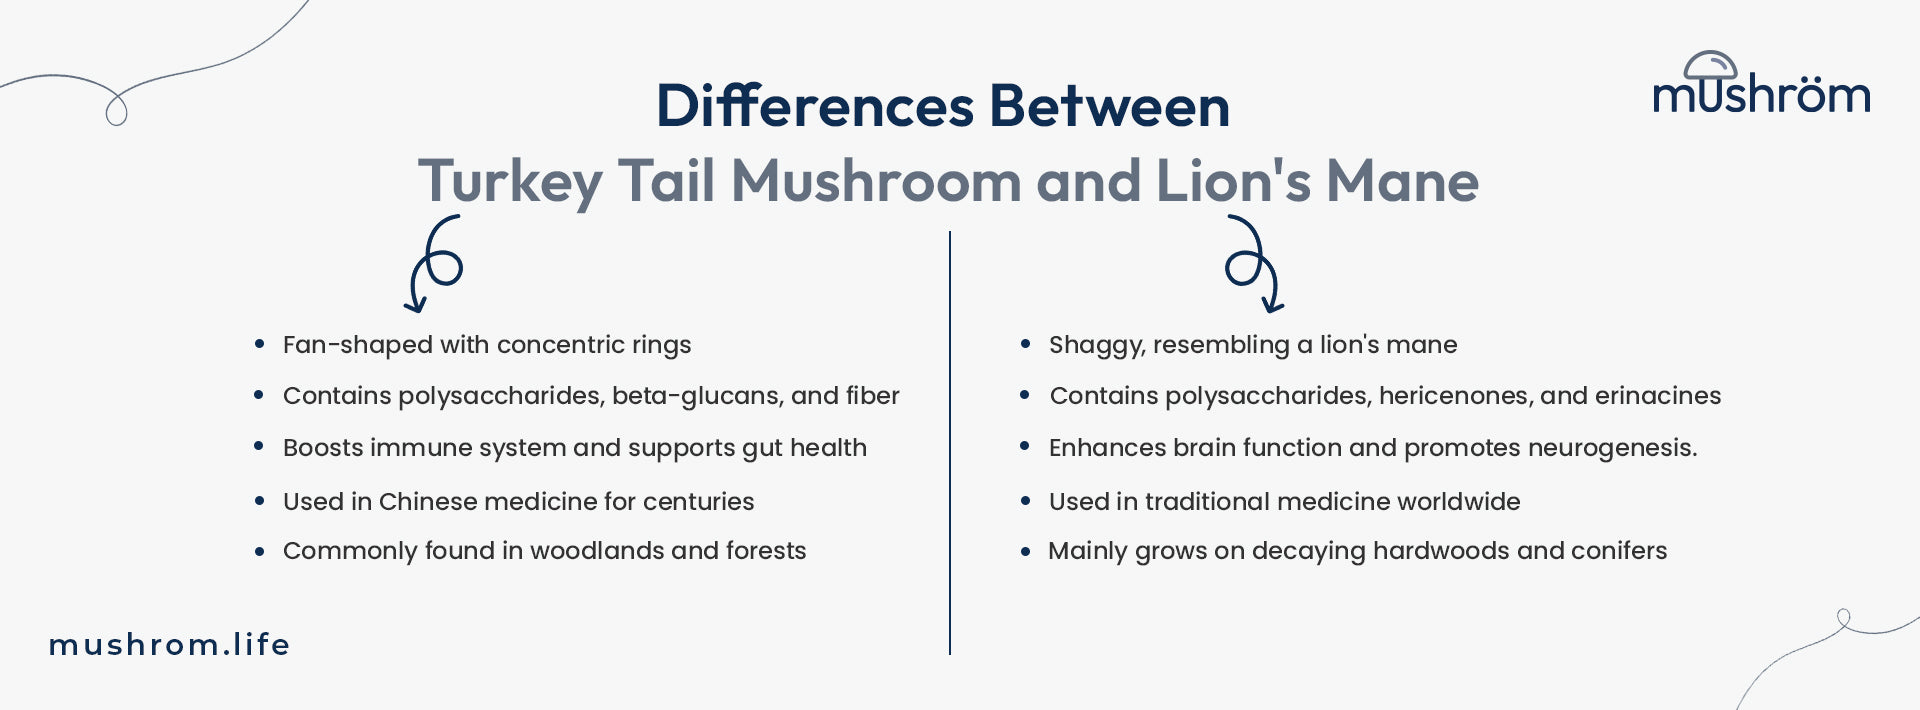 Differences between Turkey Tail Mushroom and Lion's Mane